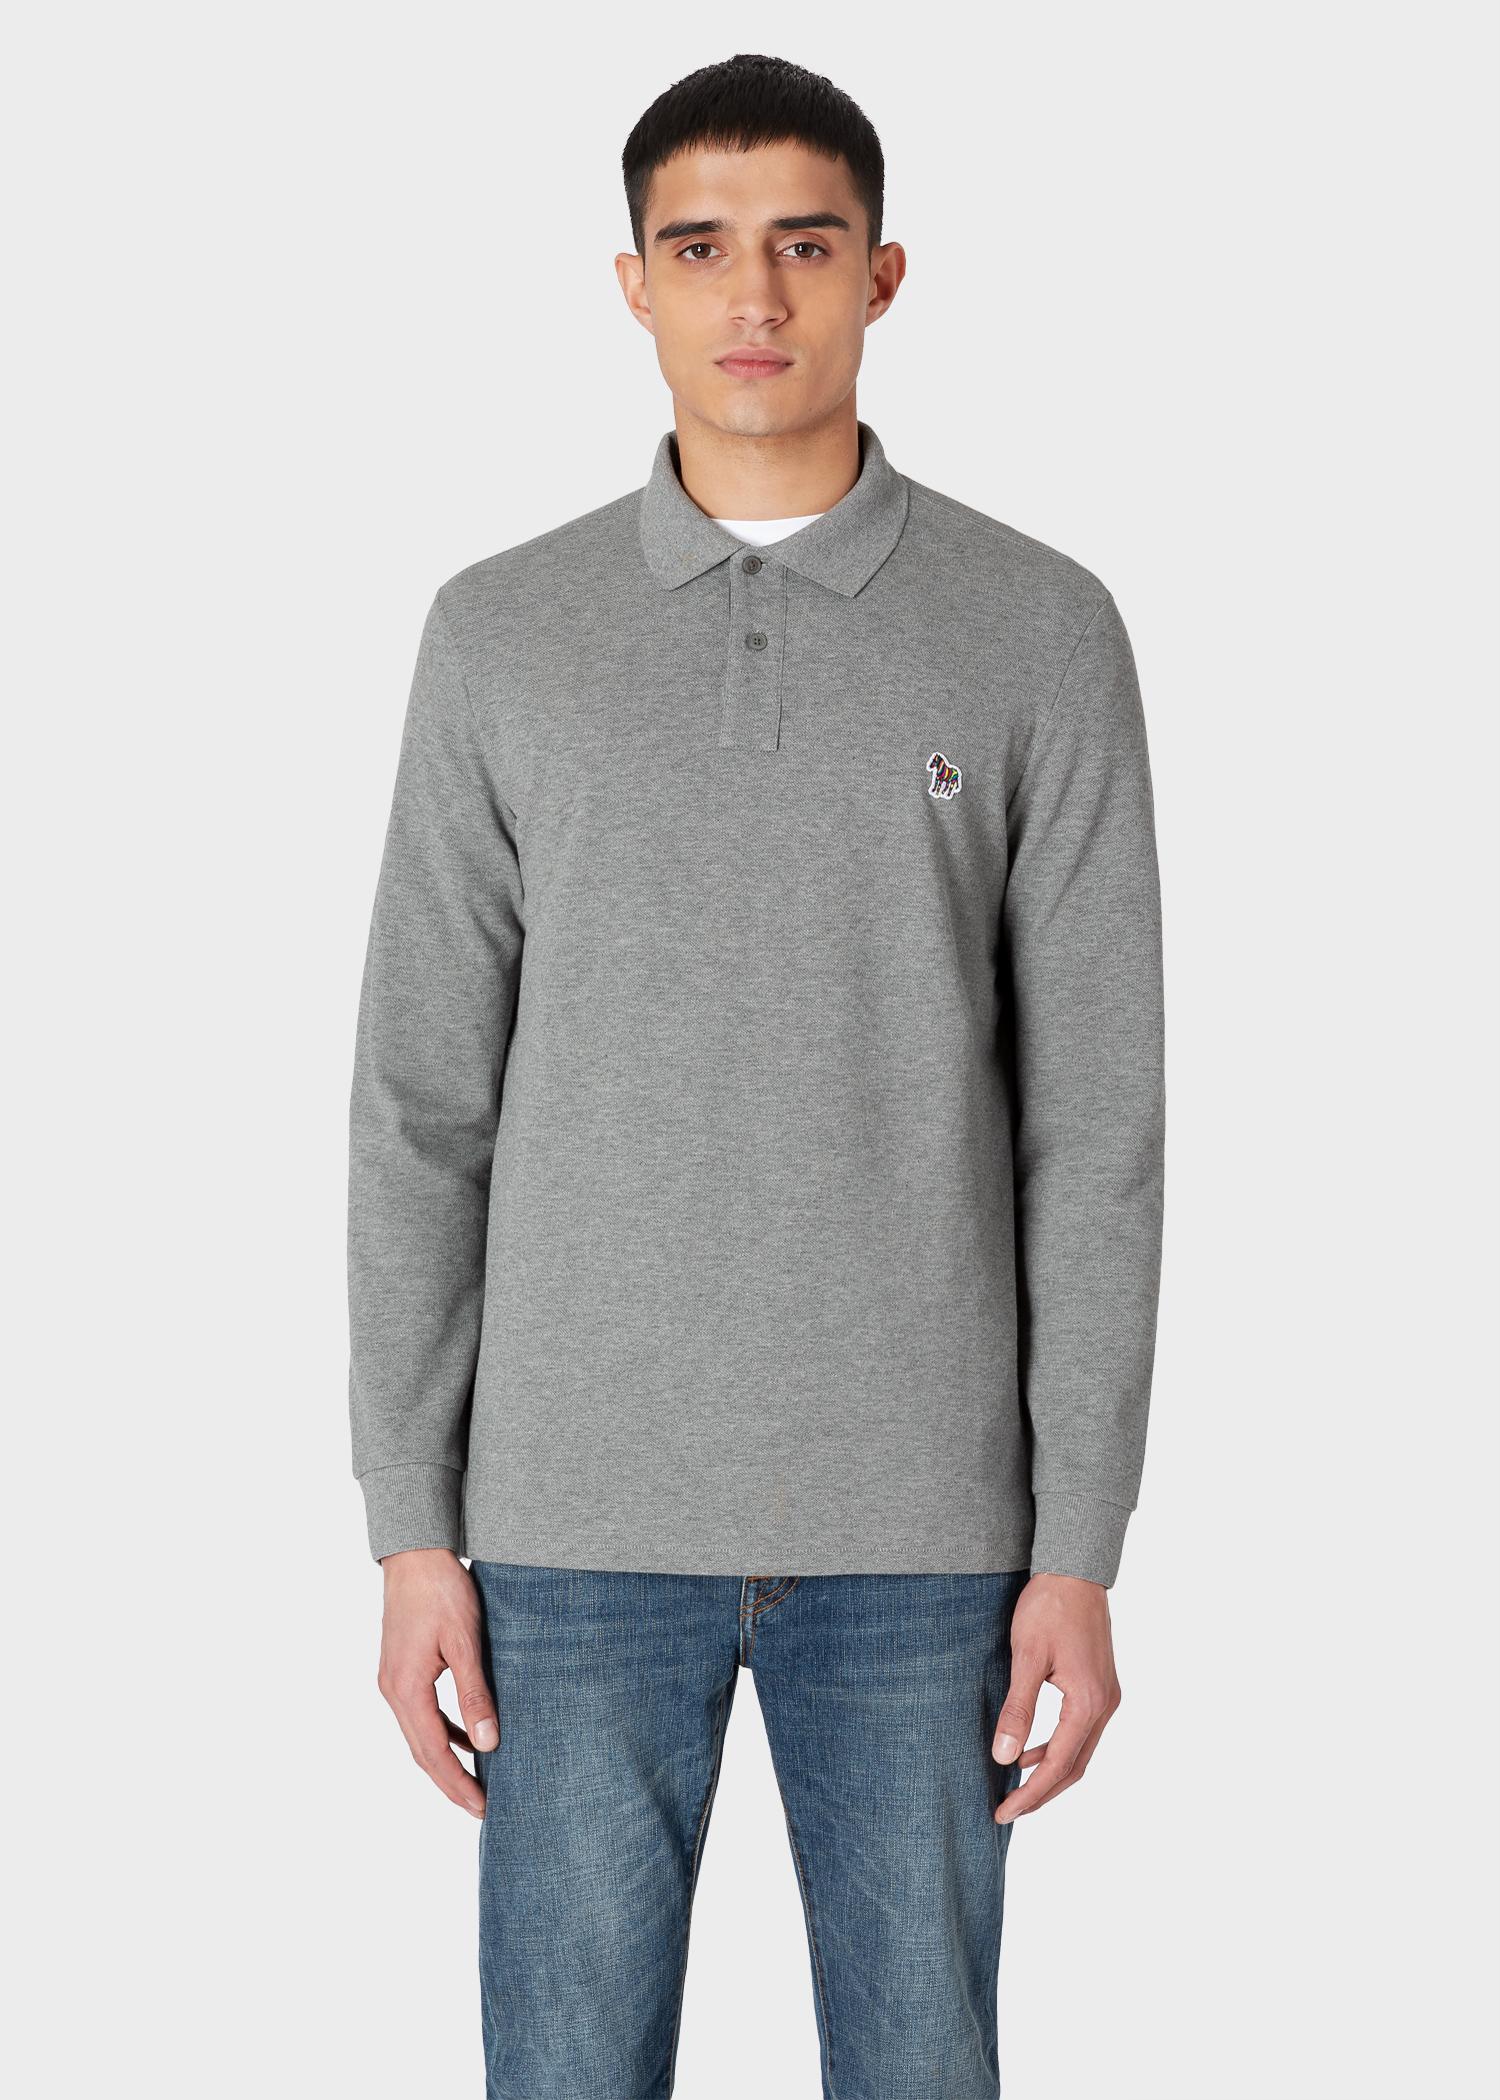 Grey Paul Smith Polo, Buy Now, Store, 50% OFF, smart-omega.com